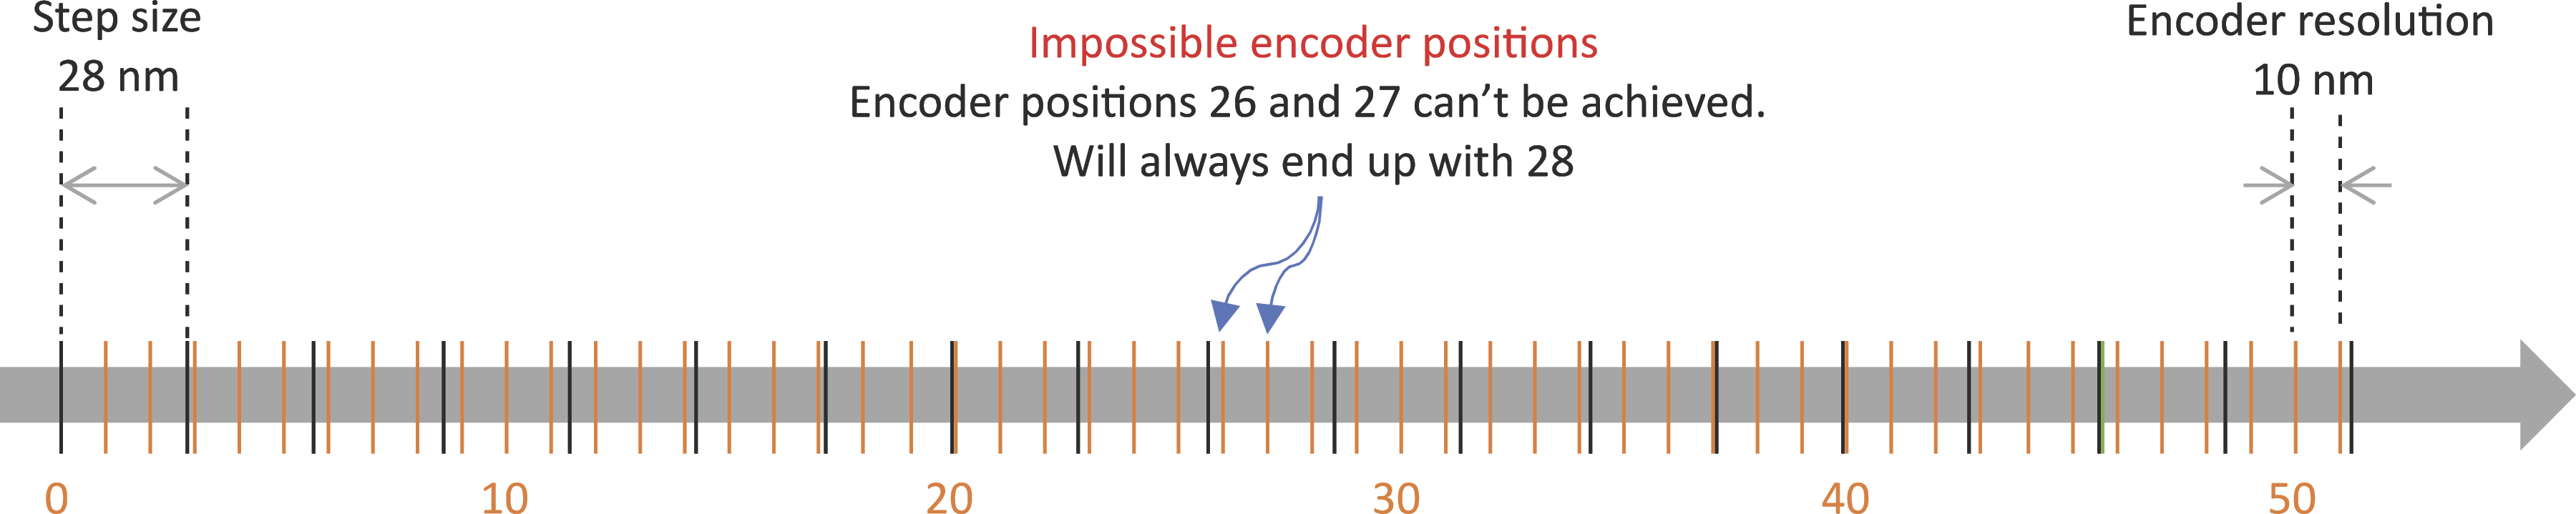 graph of impossible encoder positions are located between miniumum Picomotor steps